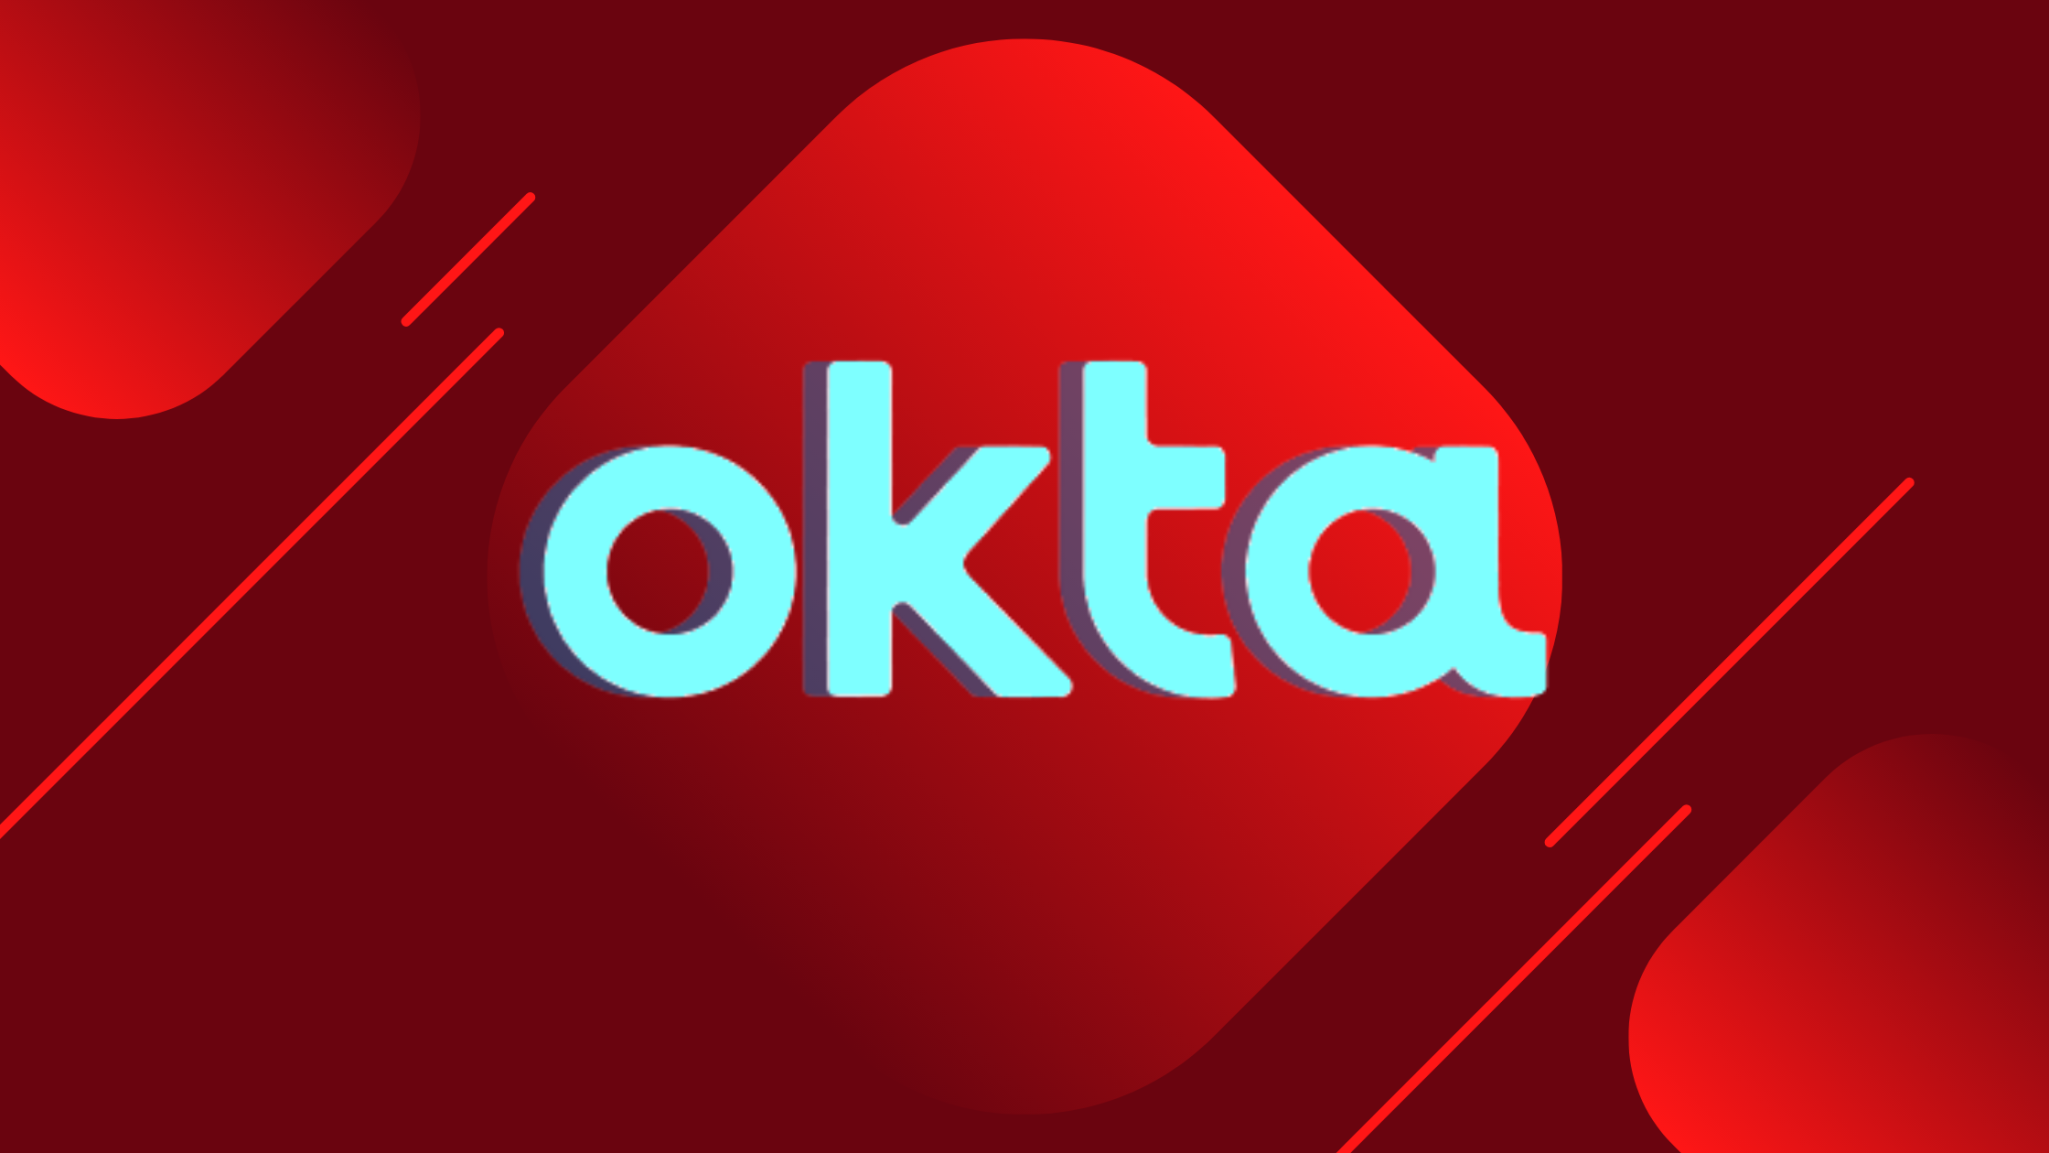 OKTA System Compromise by Lapsus